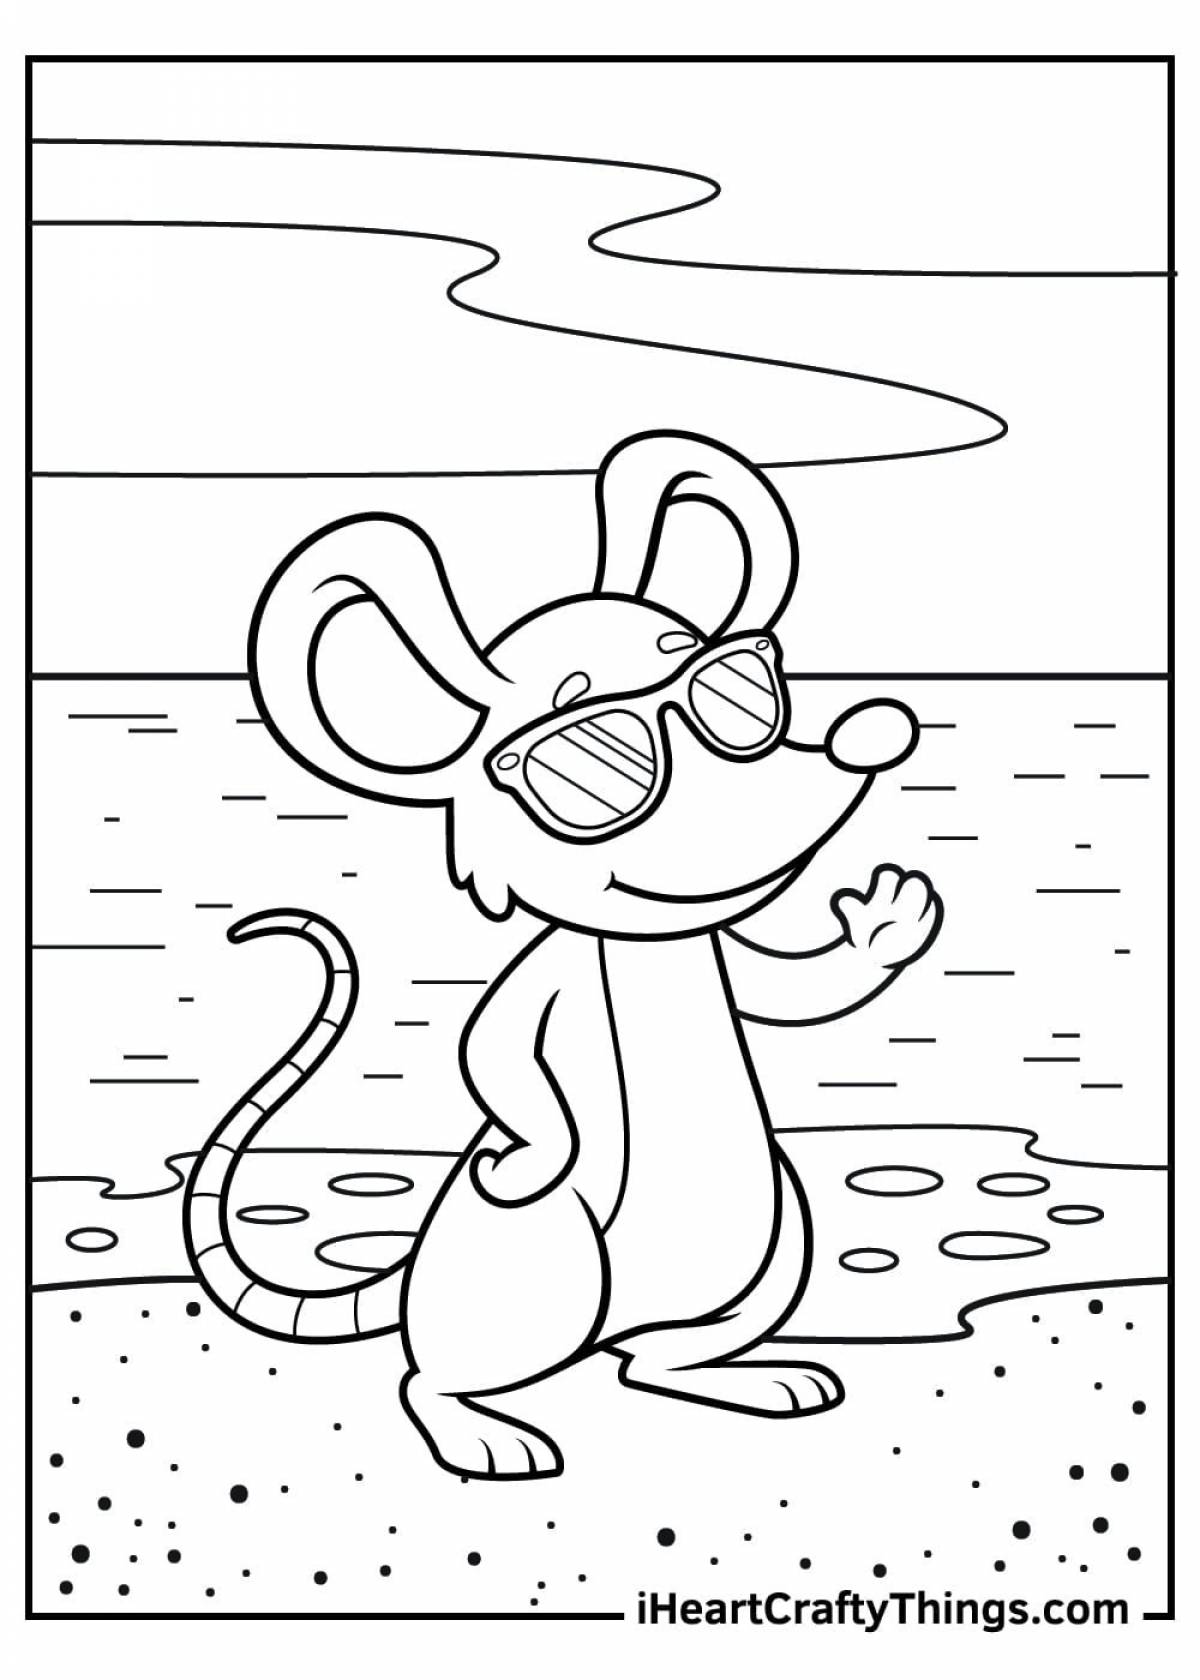 Seductive mice in the water